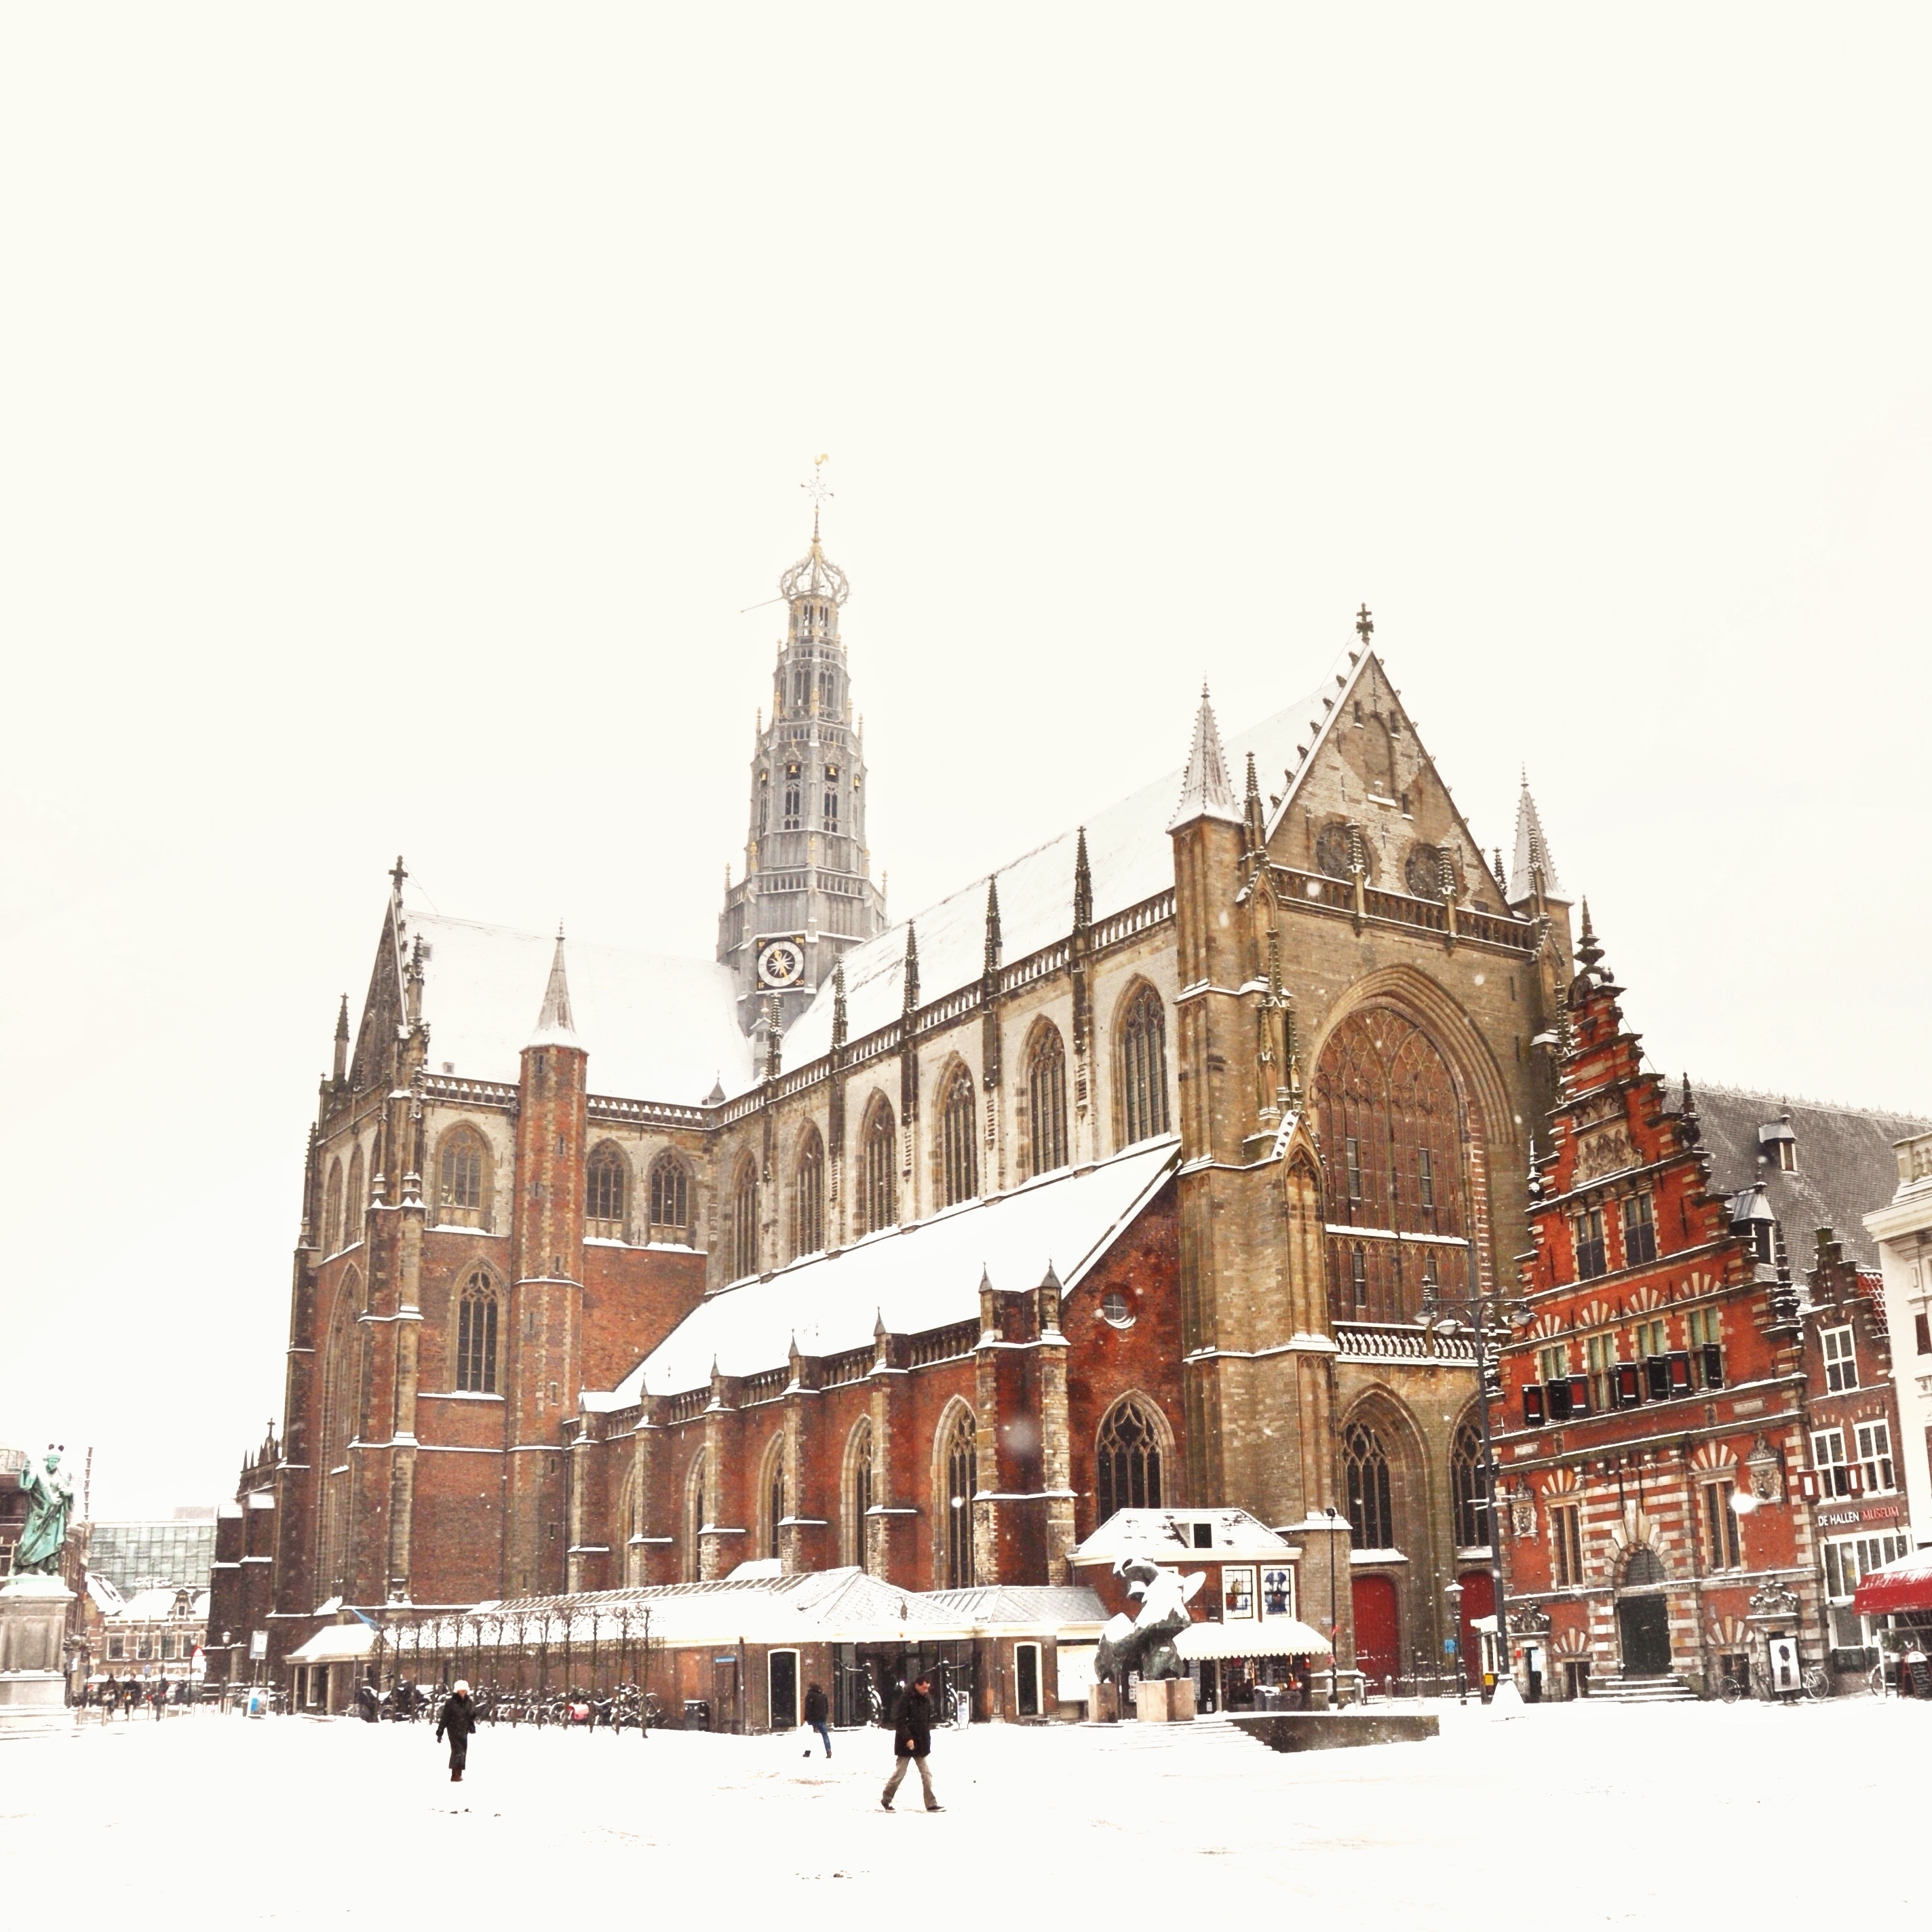 architecture, building, infrastructure, church, snow, winter